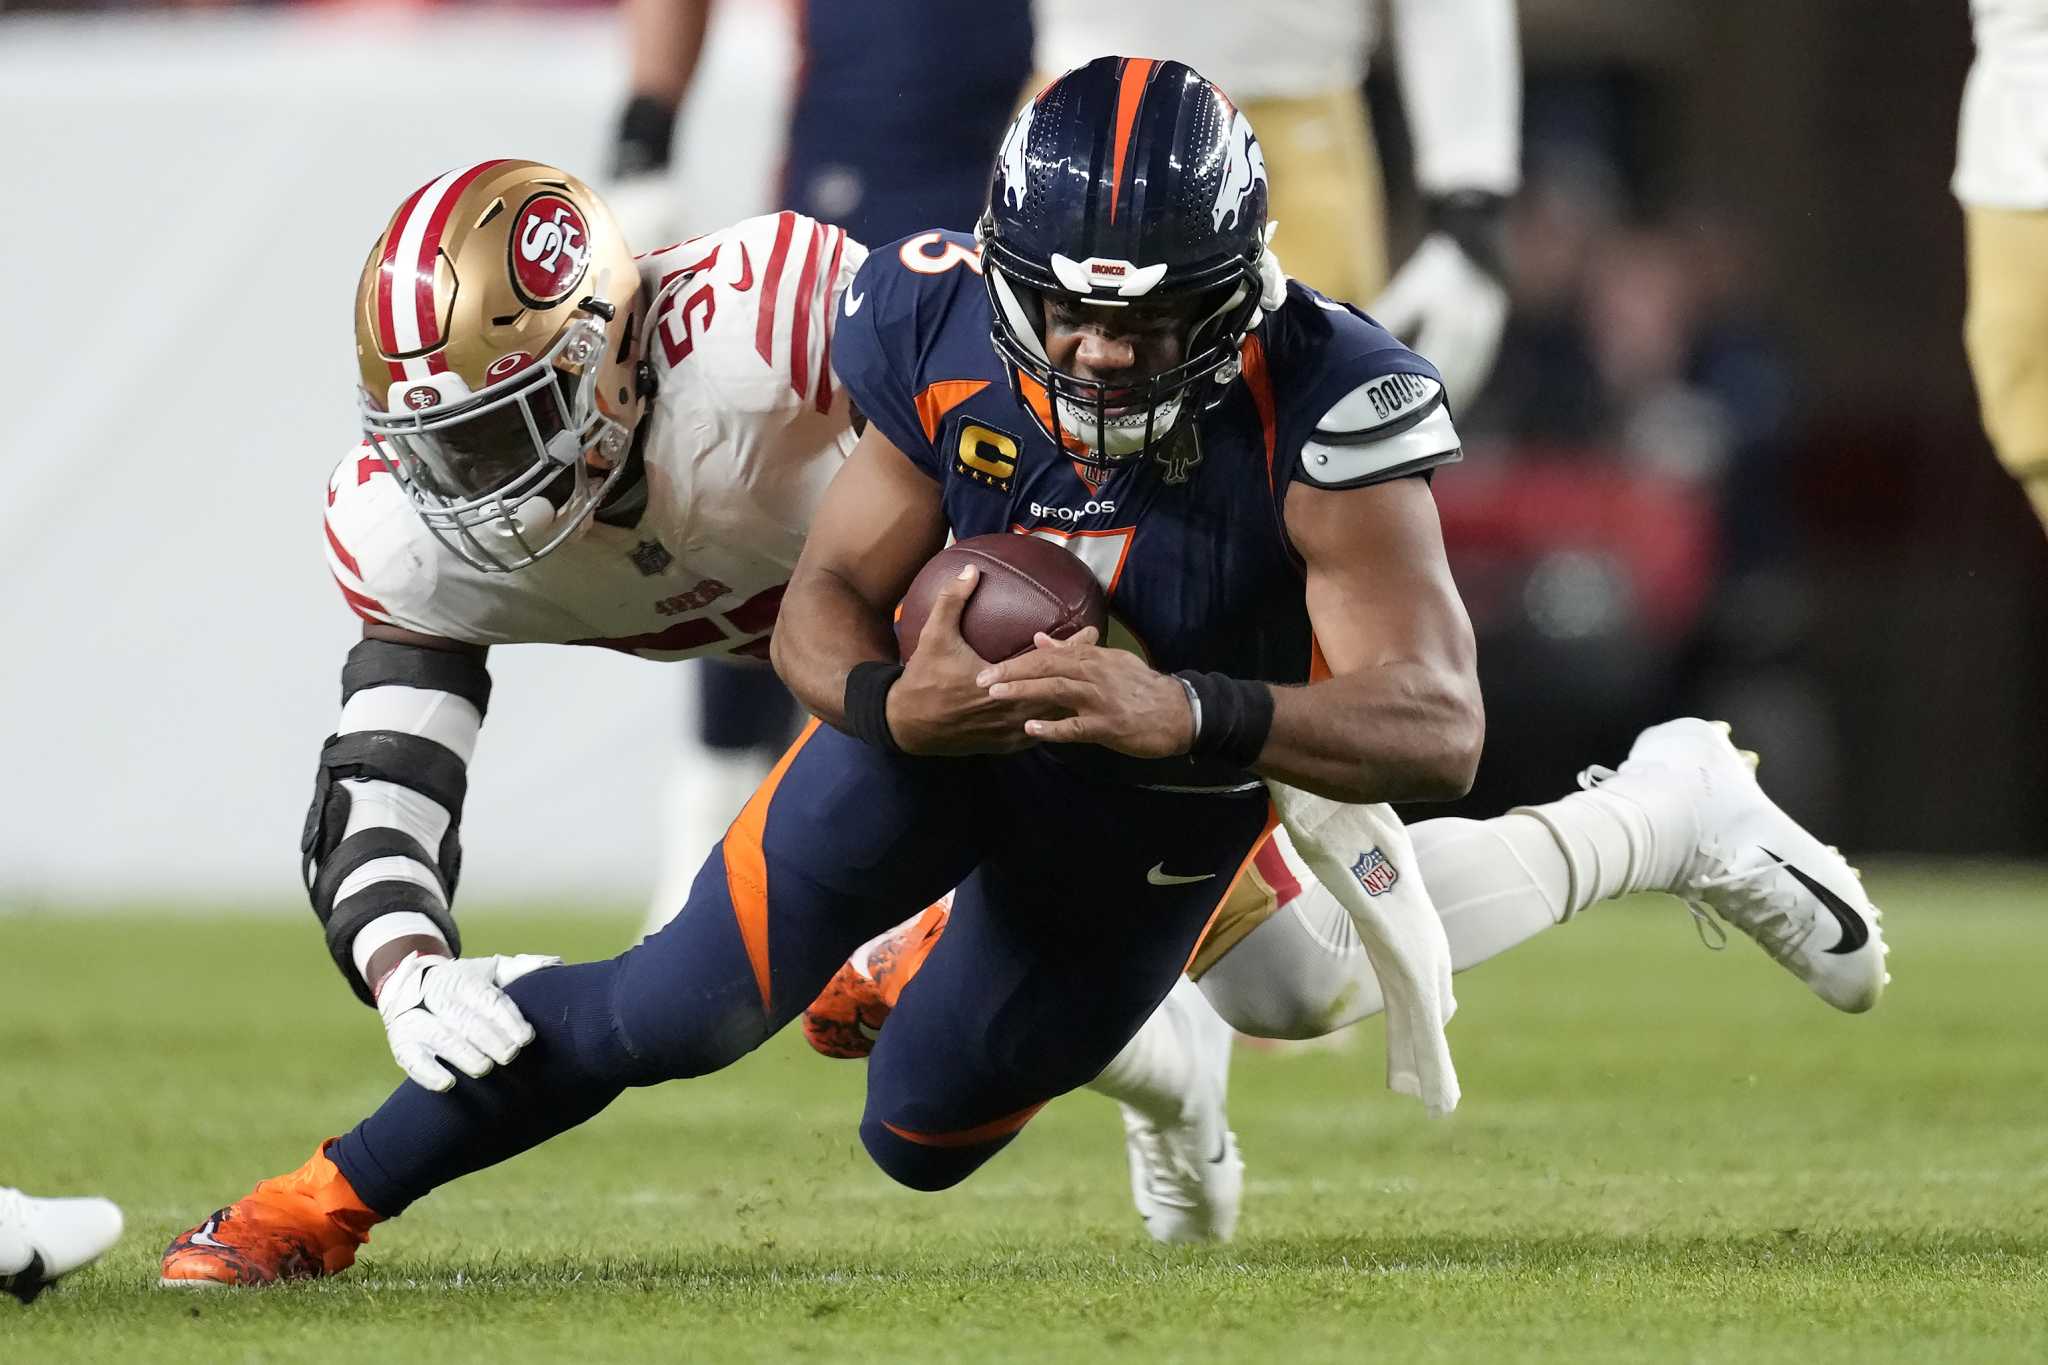 49ers vs. Broncos third quarter thread: The Niners have to finish